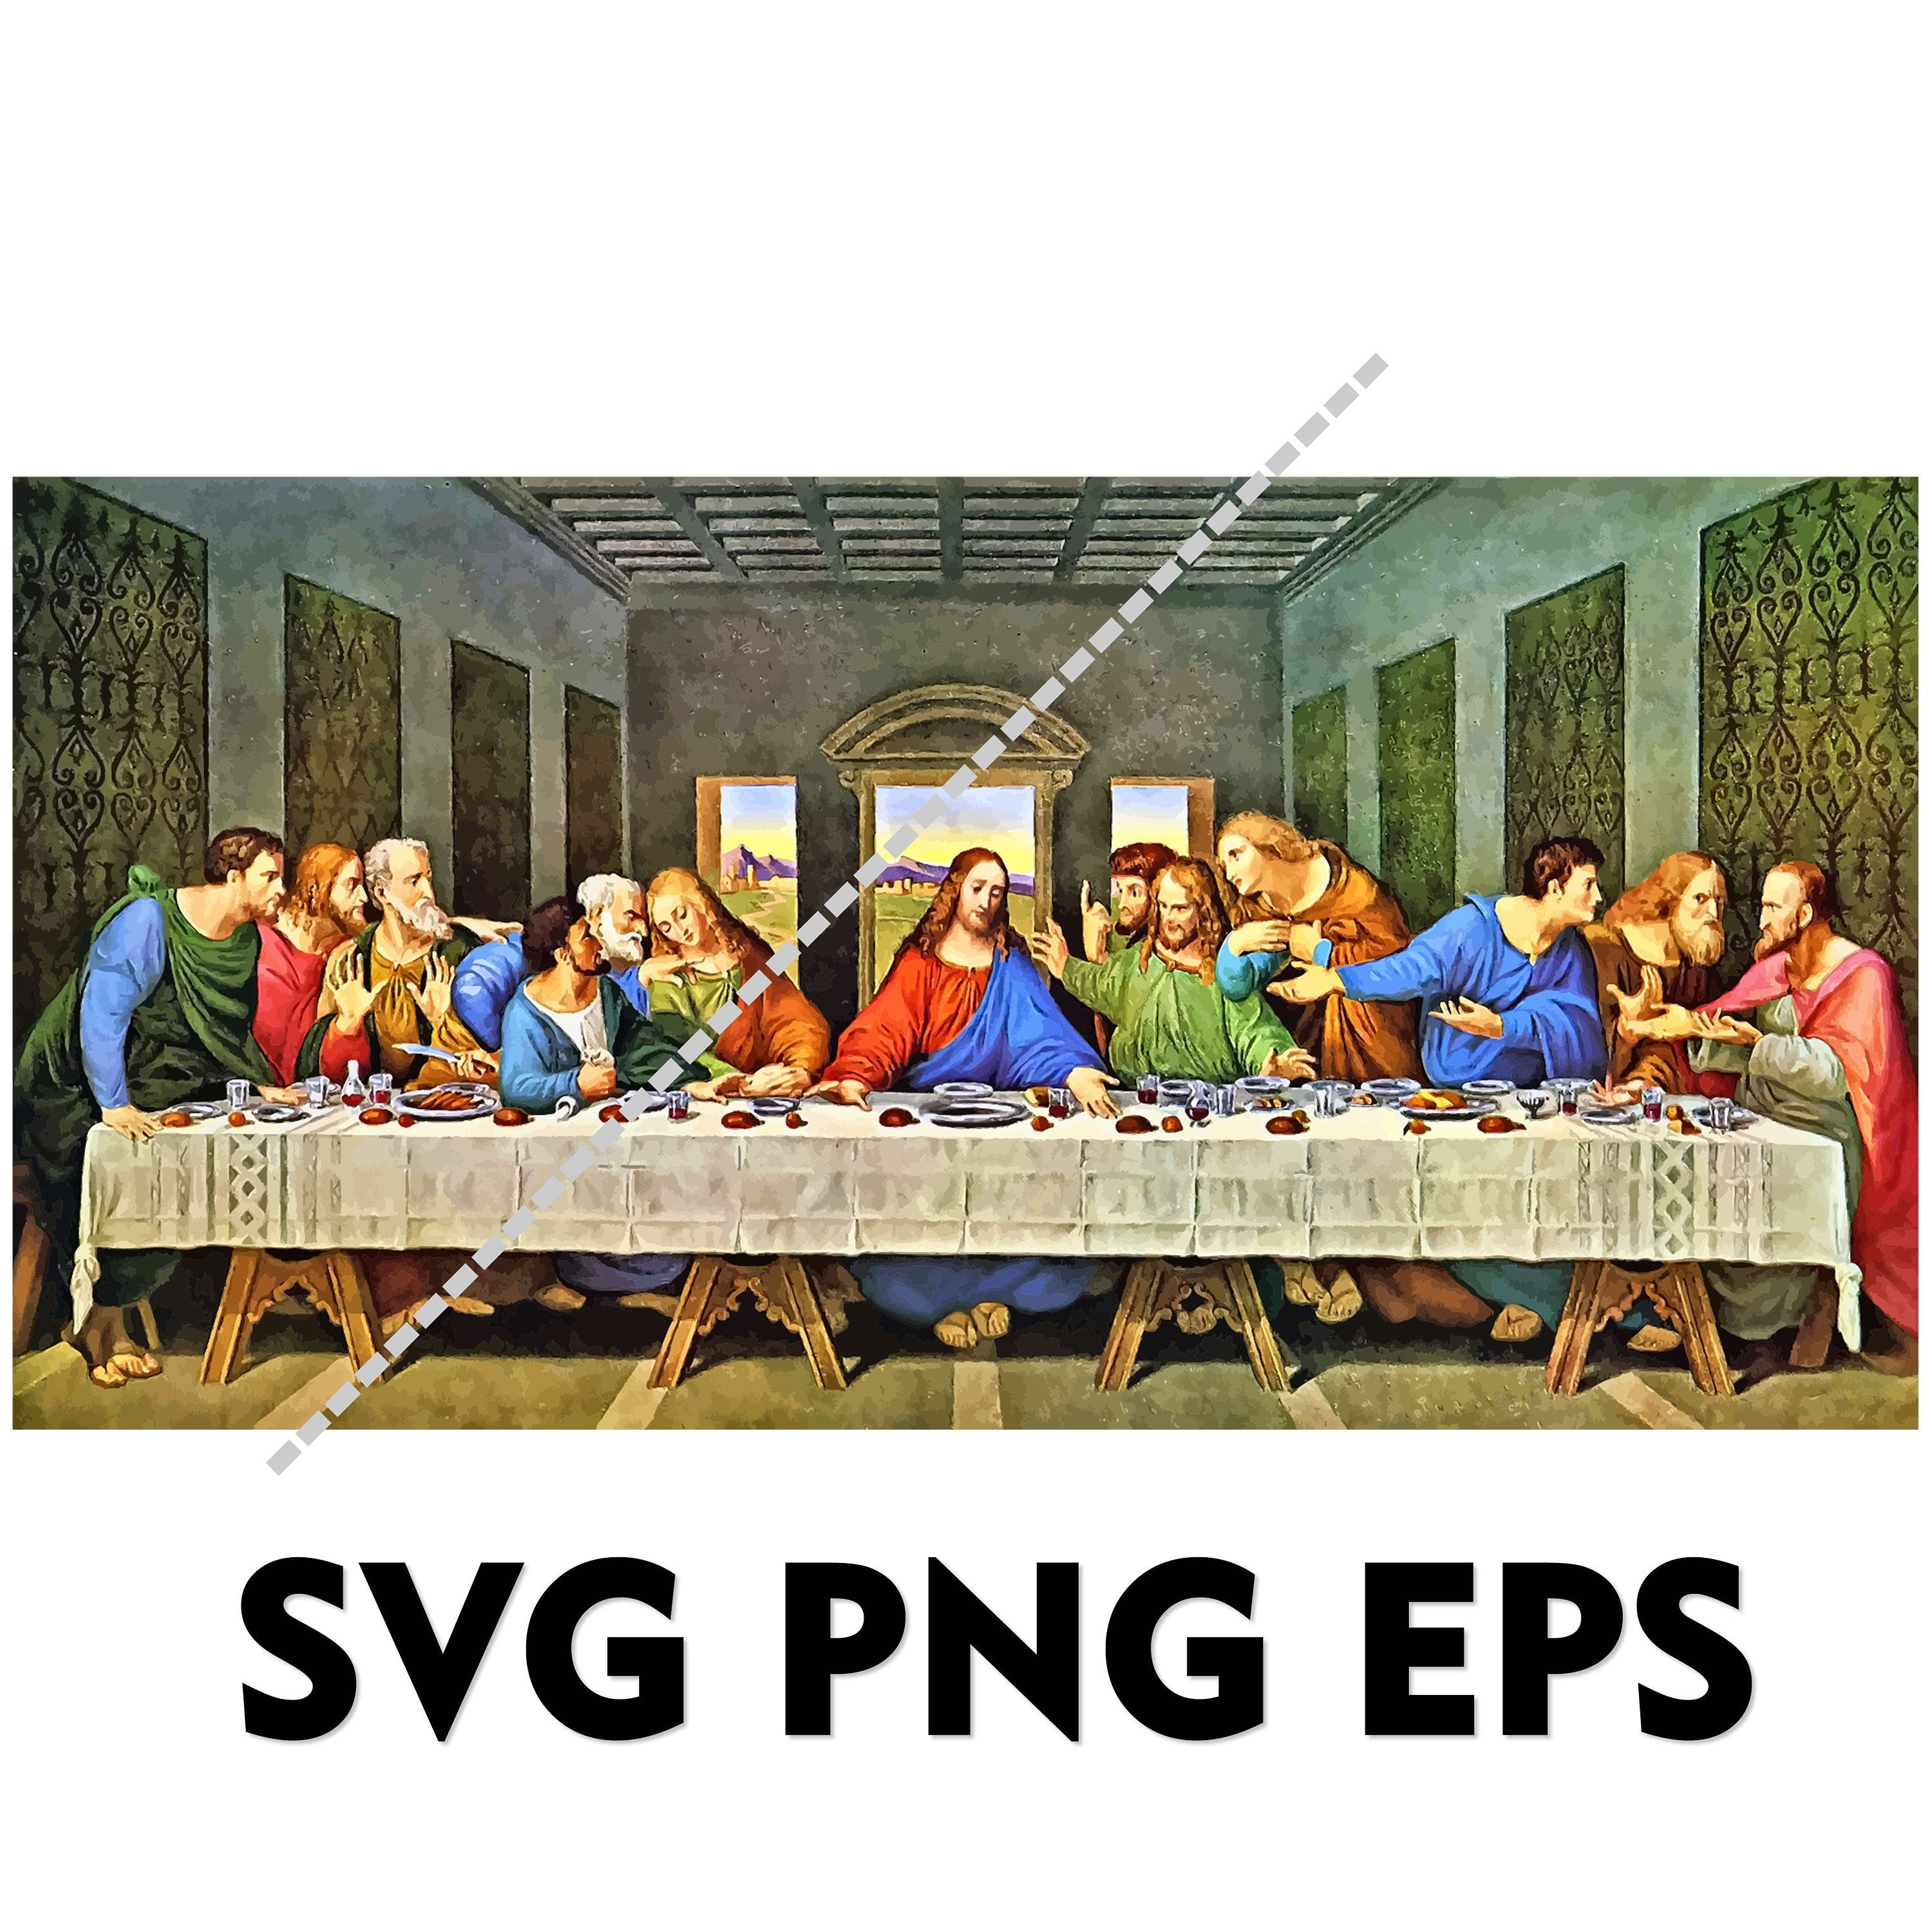 The Last Supper SVG PNG EPS